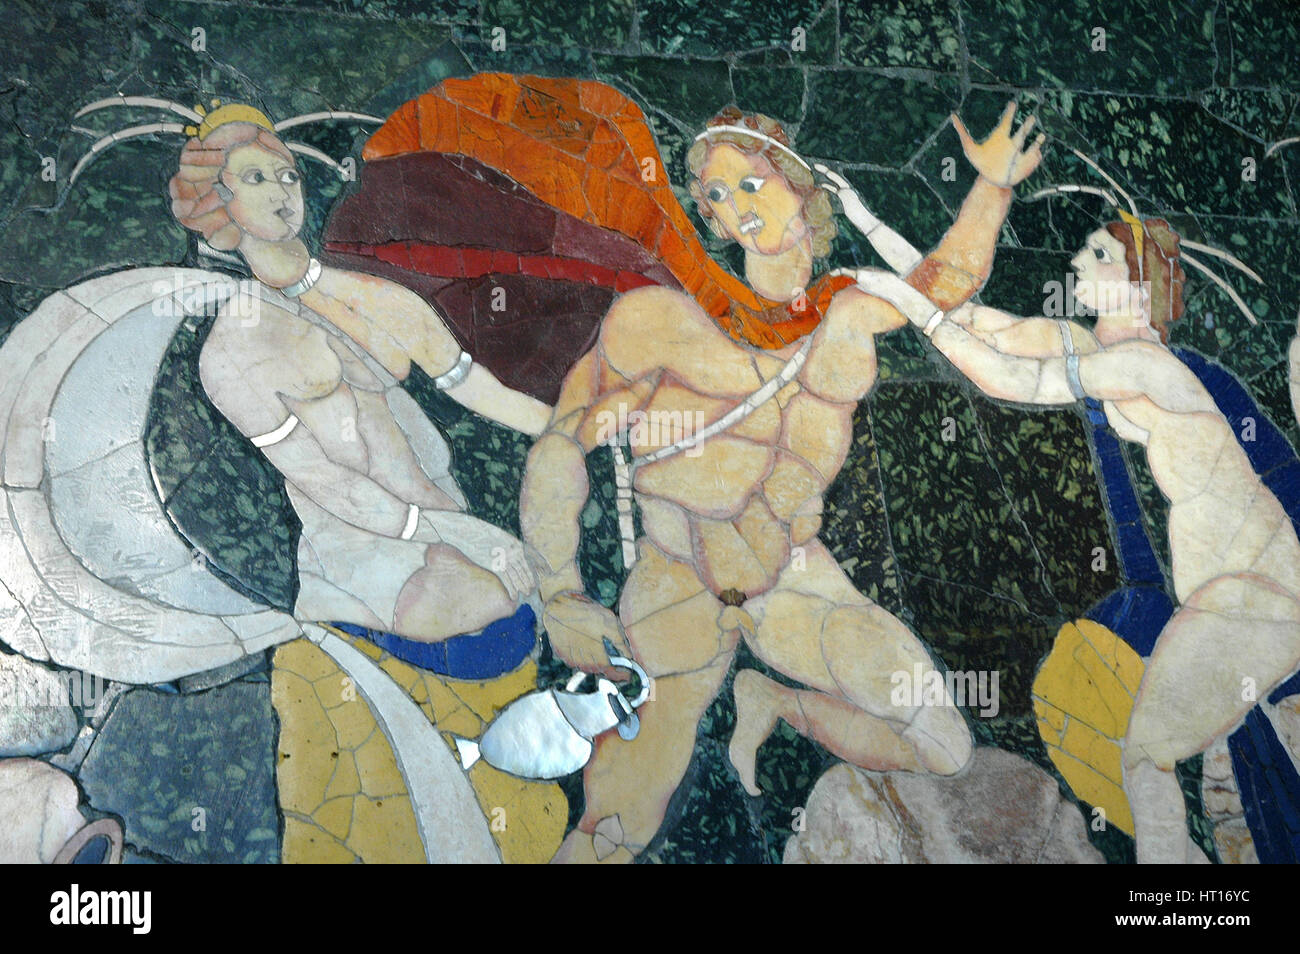 Mosaic of Hylas being abducted by the water nymphs in the opus sectile technique, which uses variou Artist: Werner Forman. Stock Photo